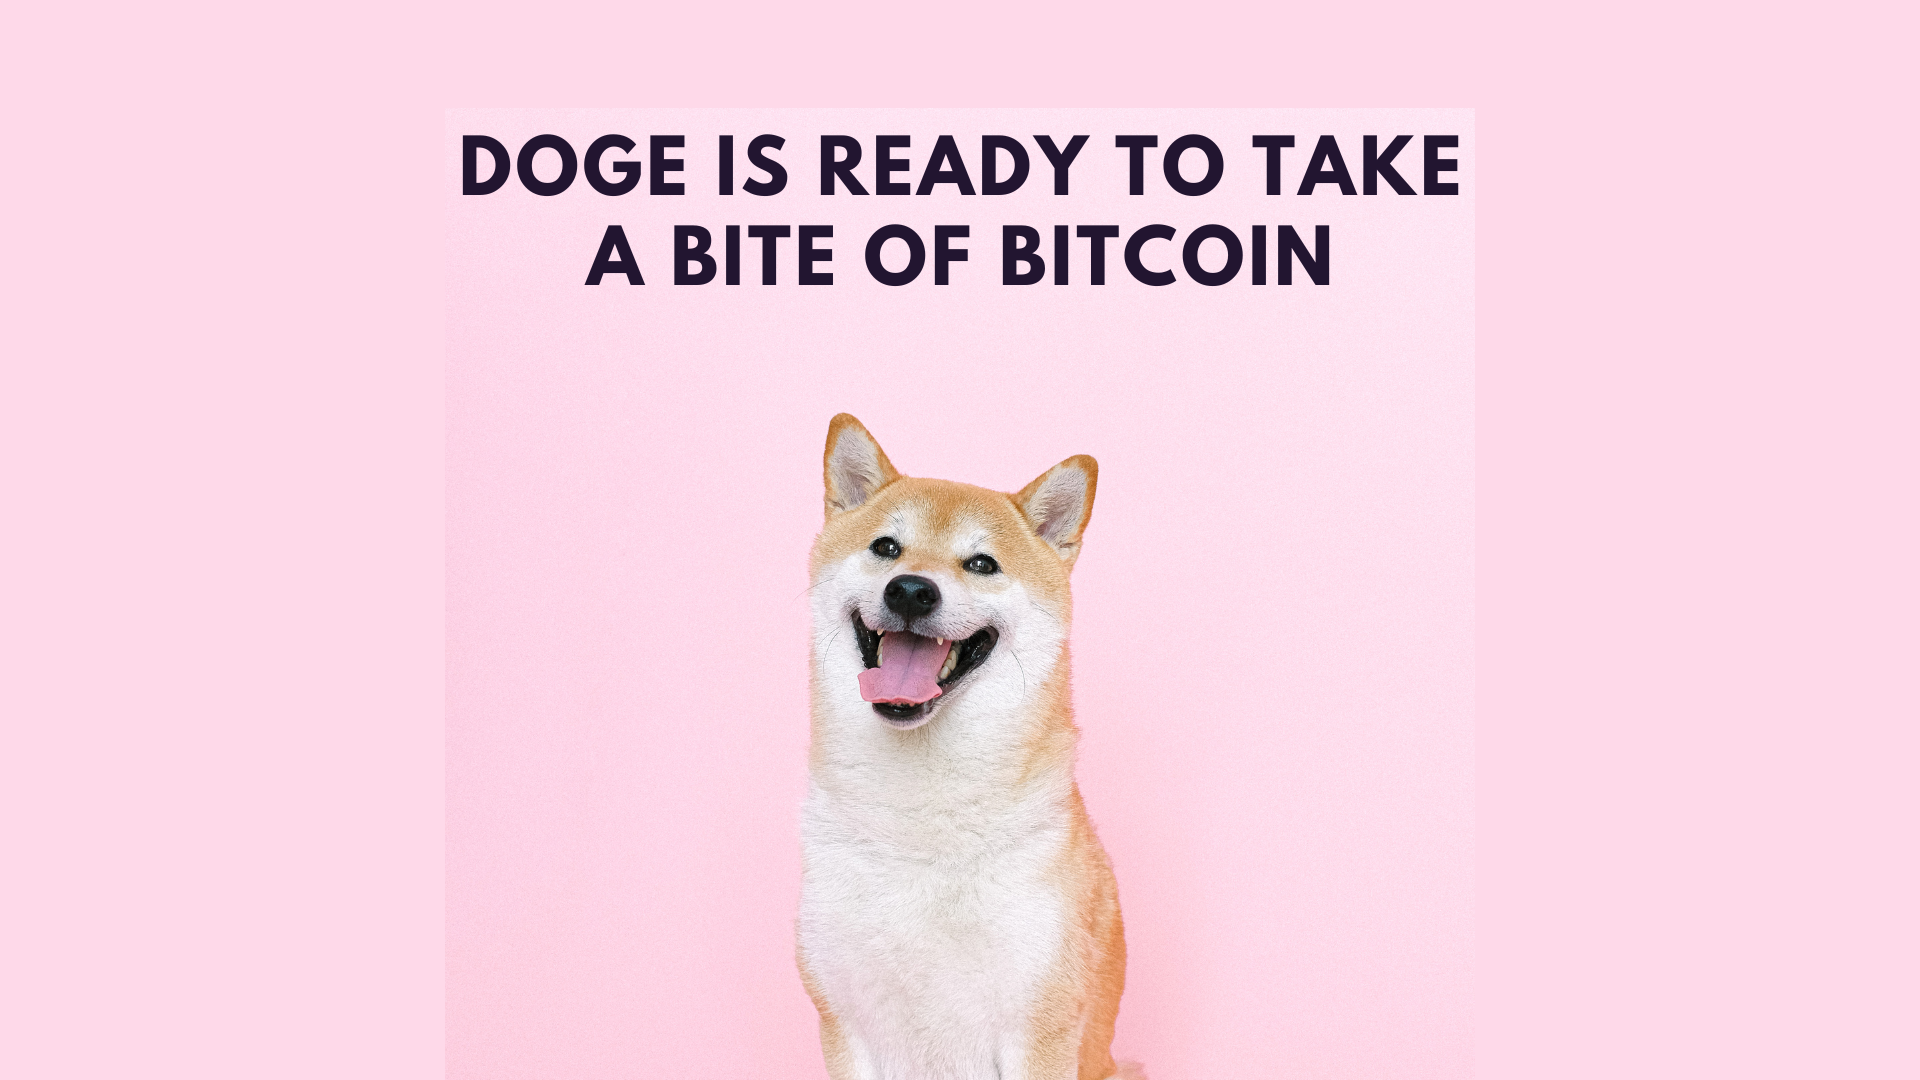 Dogecoin’s Bitcoin Rebound Could Be Bad News for Markets